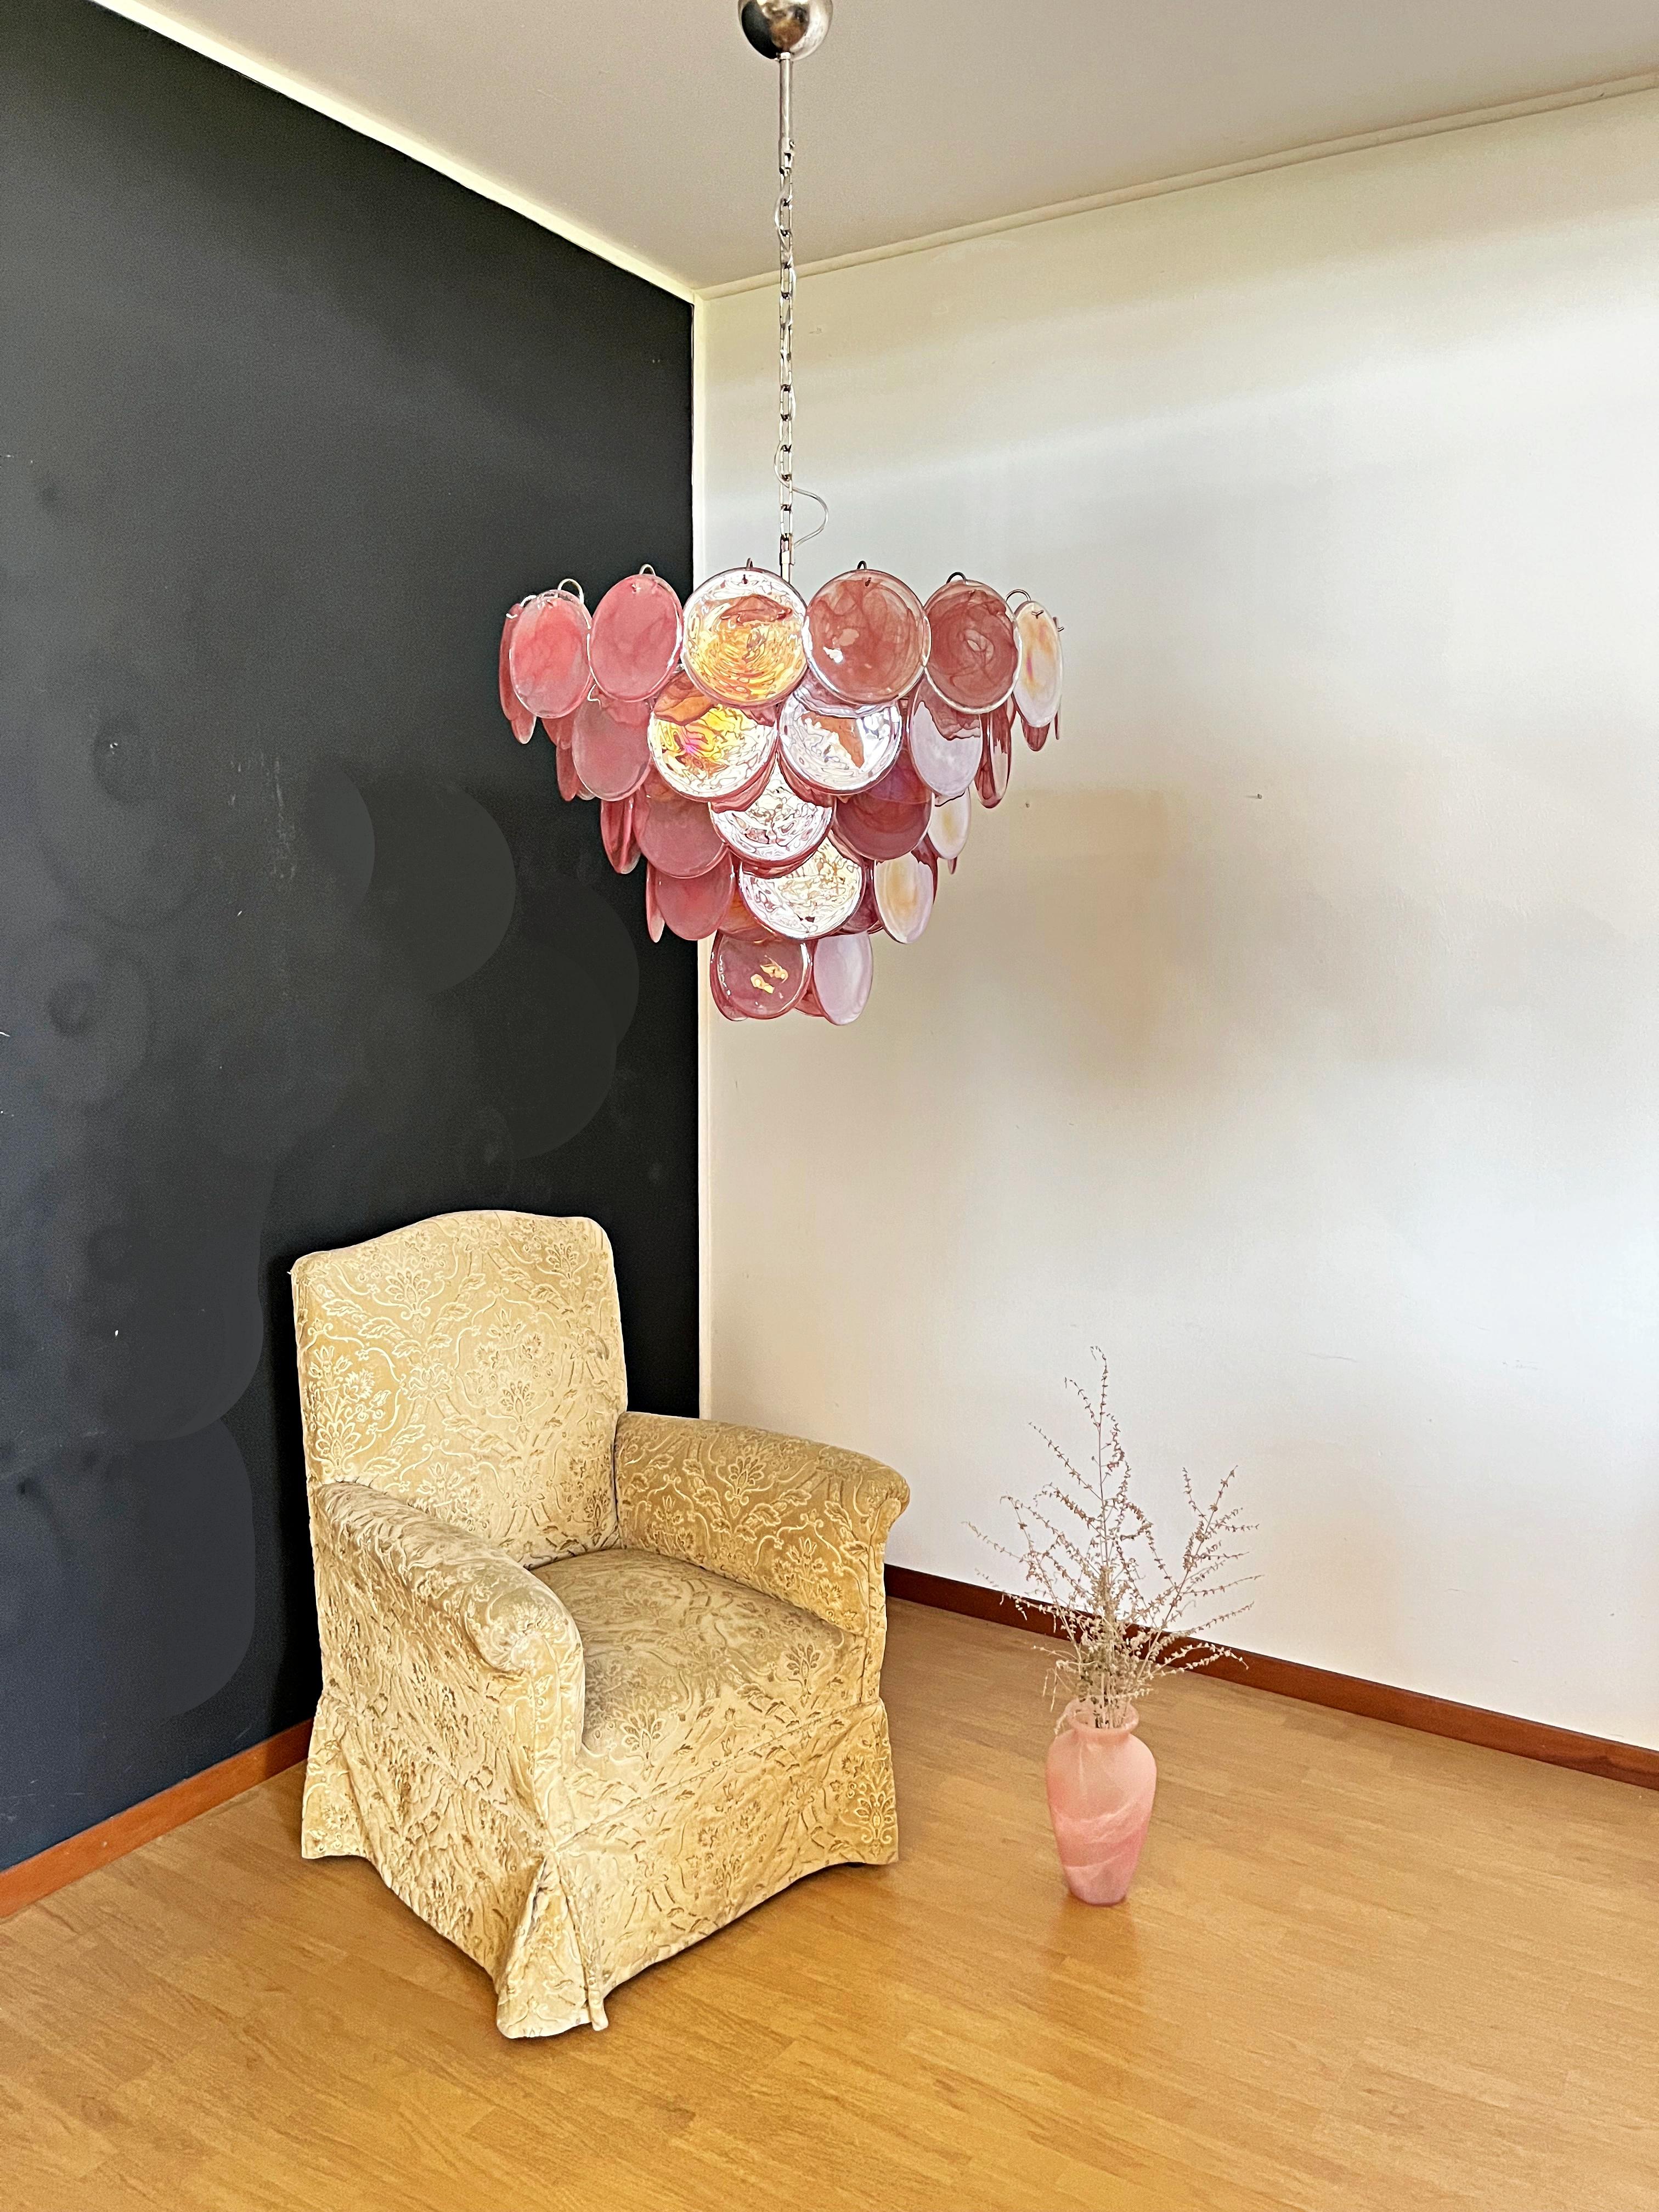 Italian Murano chandelier. The chandelier has 57 Murano PINK albaster iridescent glass disks. The glasses are now unavailable, they have the particularity of reflecting a multiplicity of colors, which makes the chandelier a true work of art. Nickel